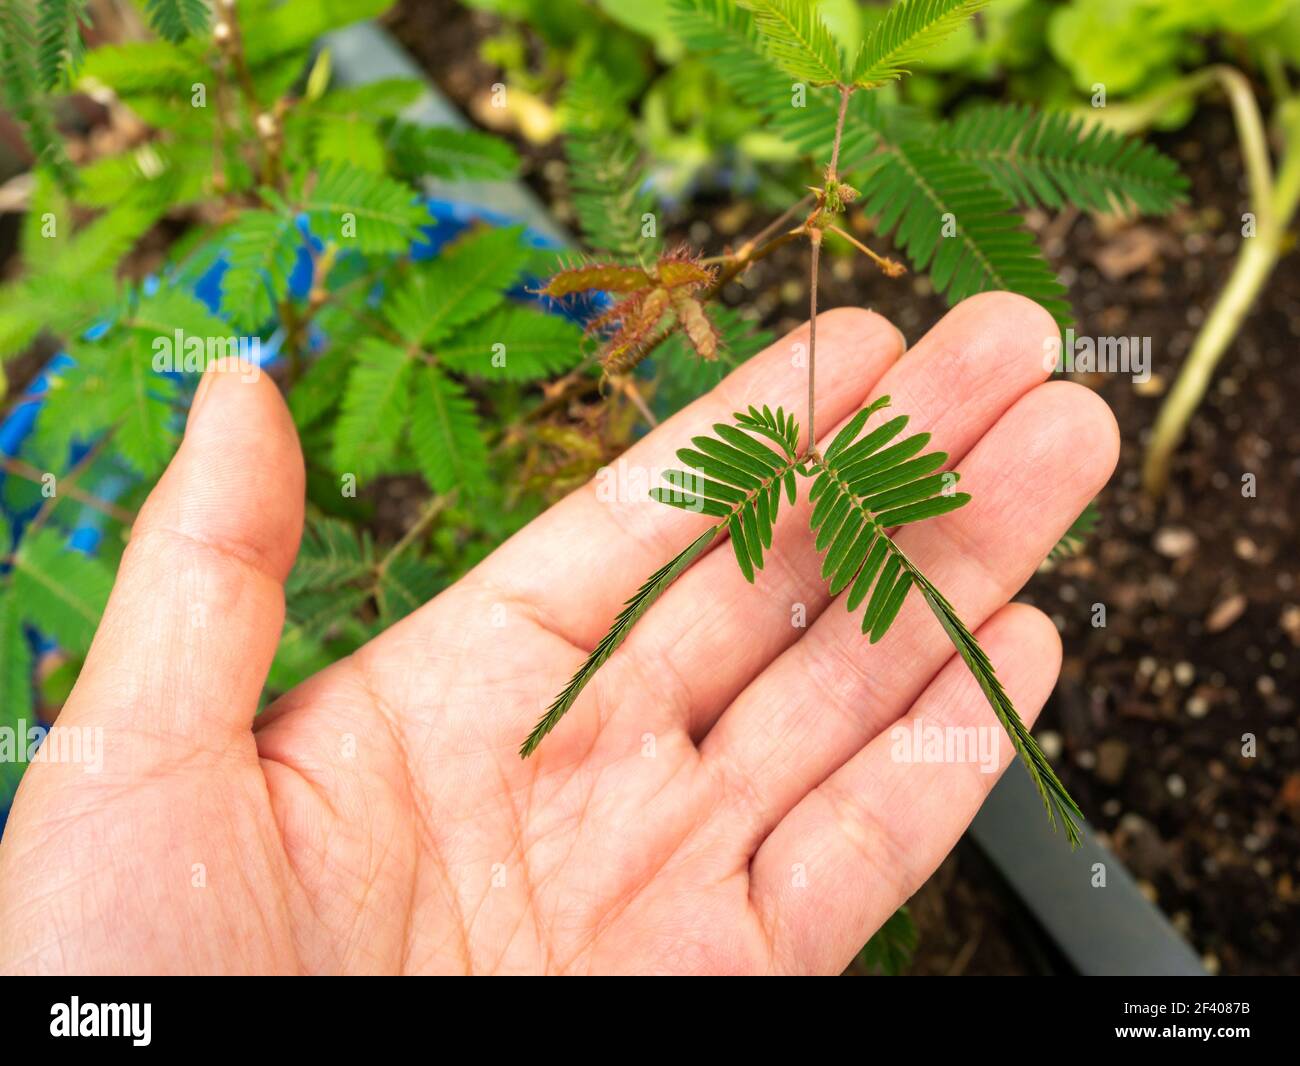 Mimosa Pudica also Called Sensitive Plant, Sleepy Plant, Action Plant, Touch-me-not, Shameplant. Its Leaves Fold Inward and Fall off when Touched, and Stock Photo